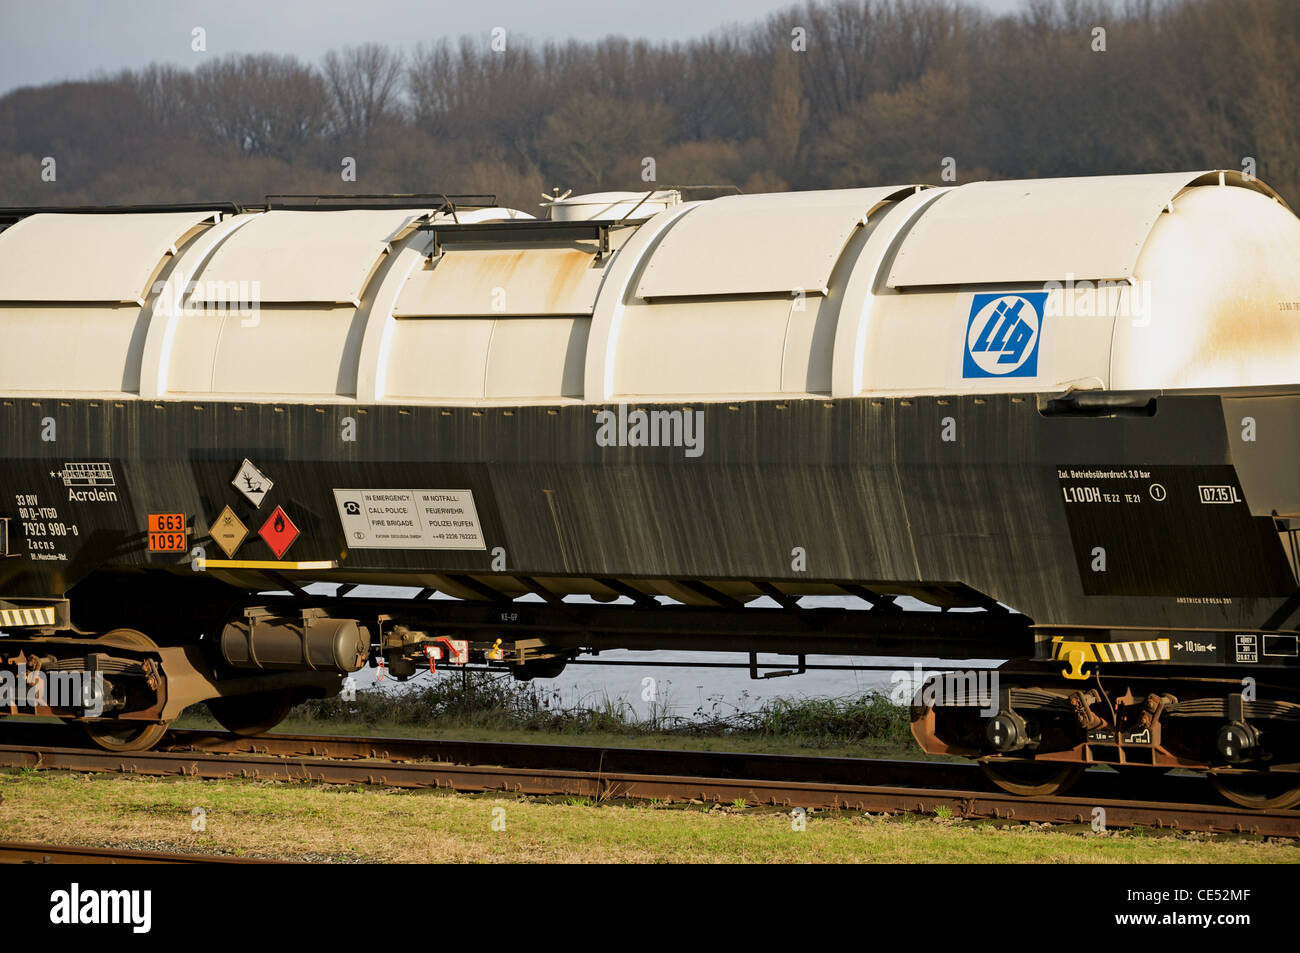 Railway tanker loaded with Acrolein a toxic substance used in the plastics industry, Wesseling, Cologne, Germany. Stock Photo